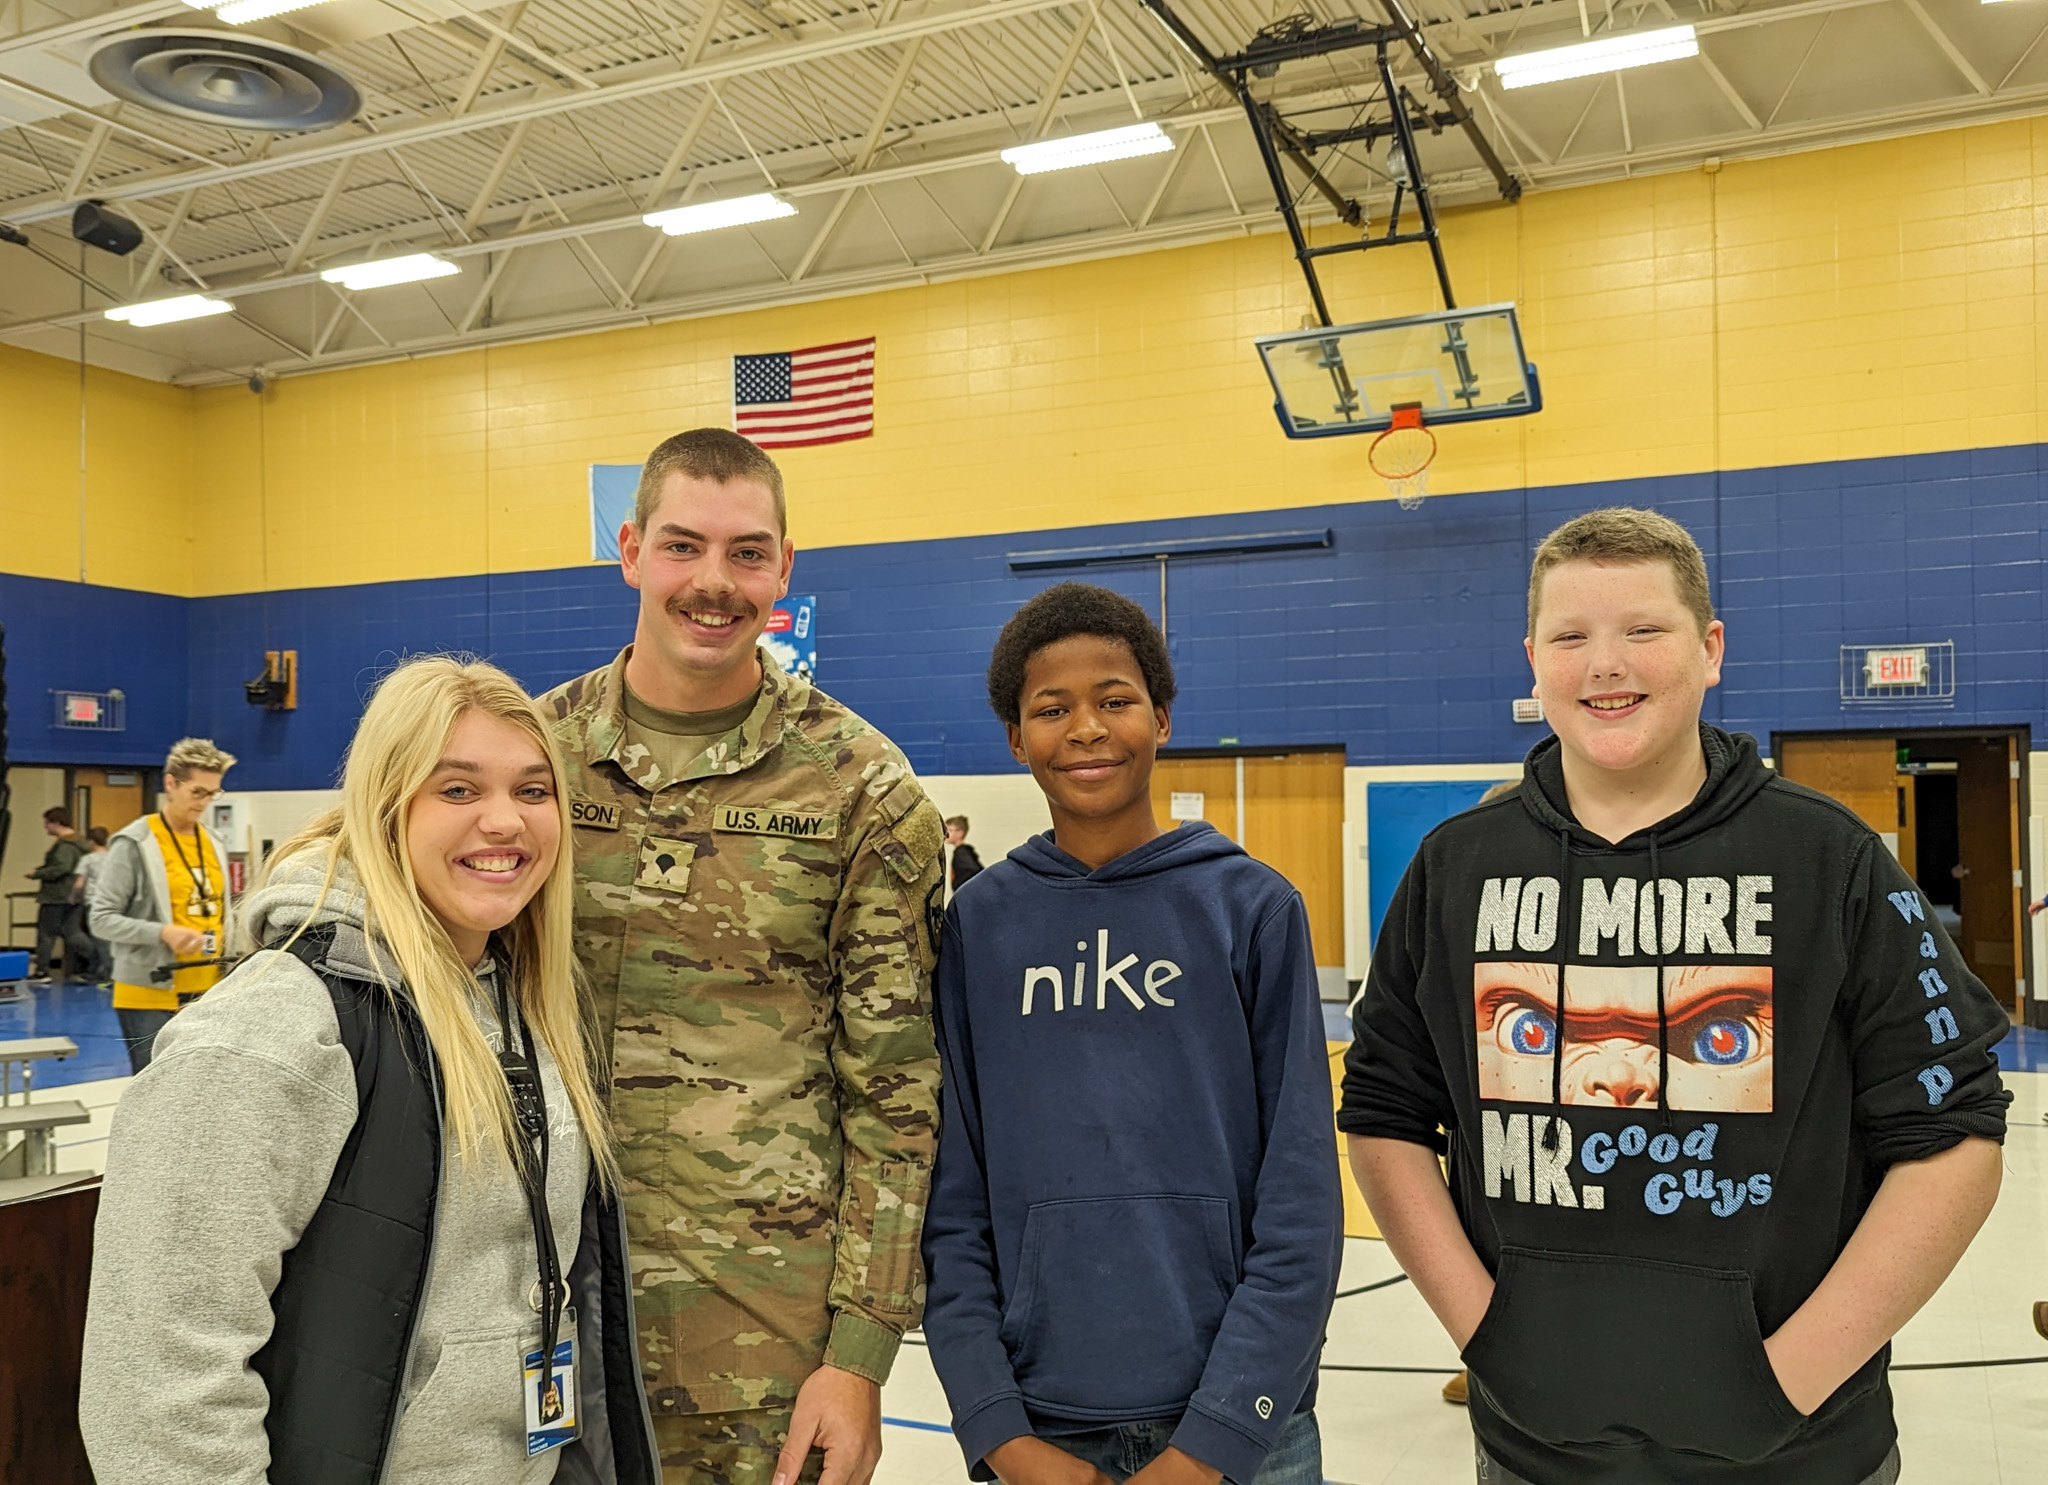 Students and teacher with veteran